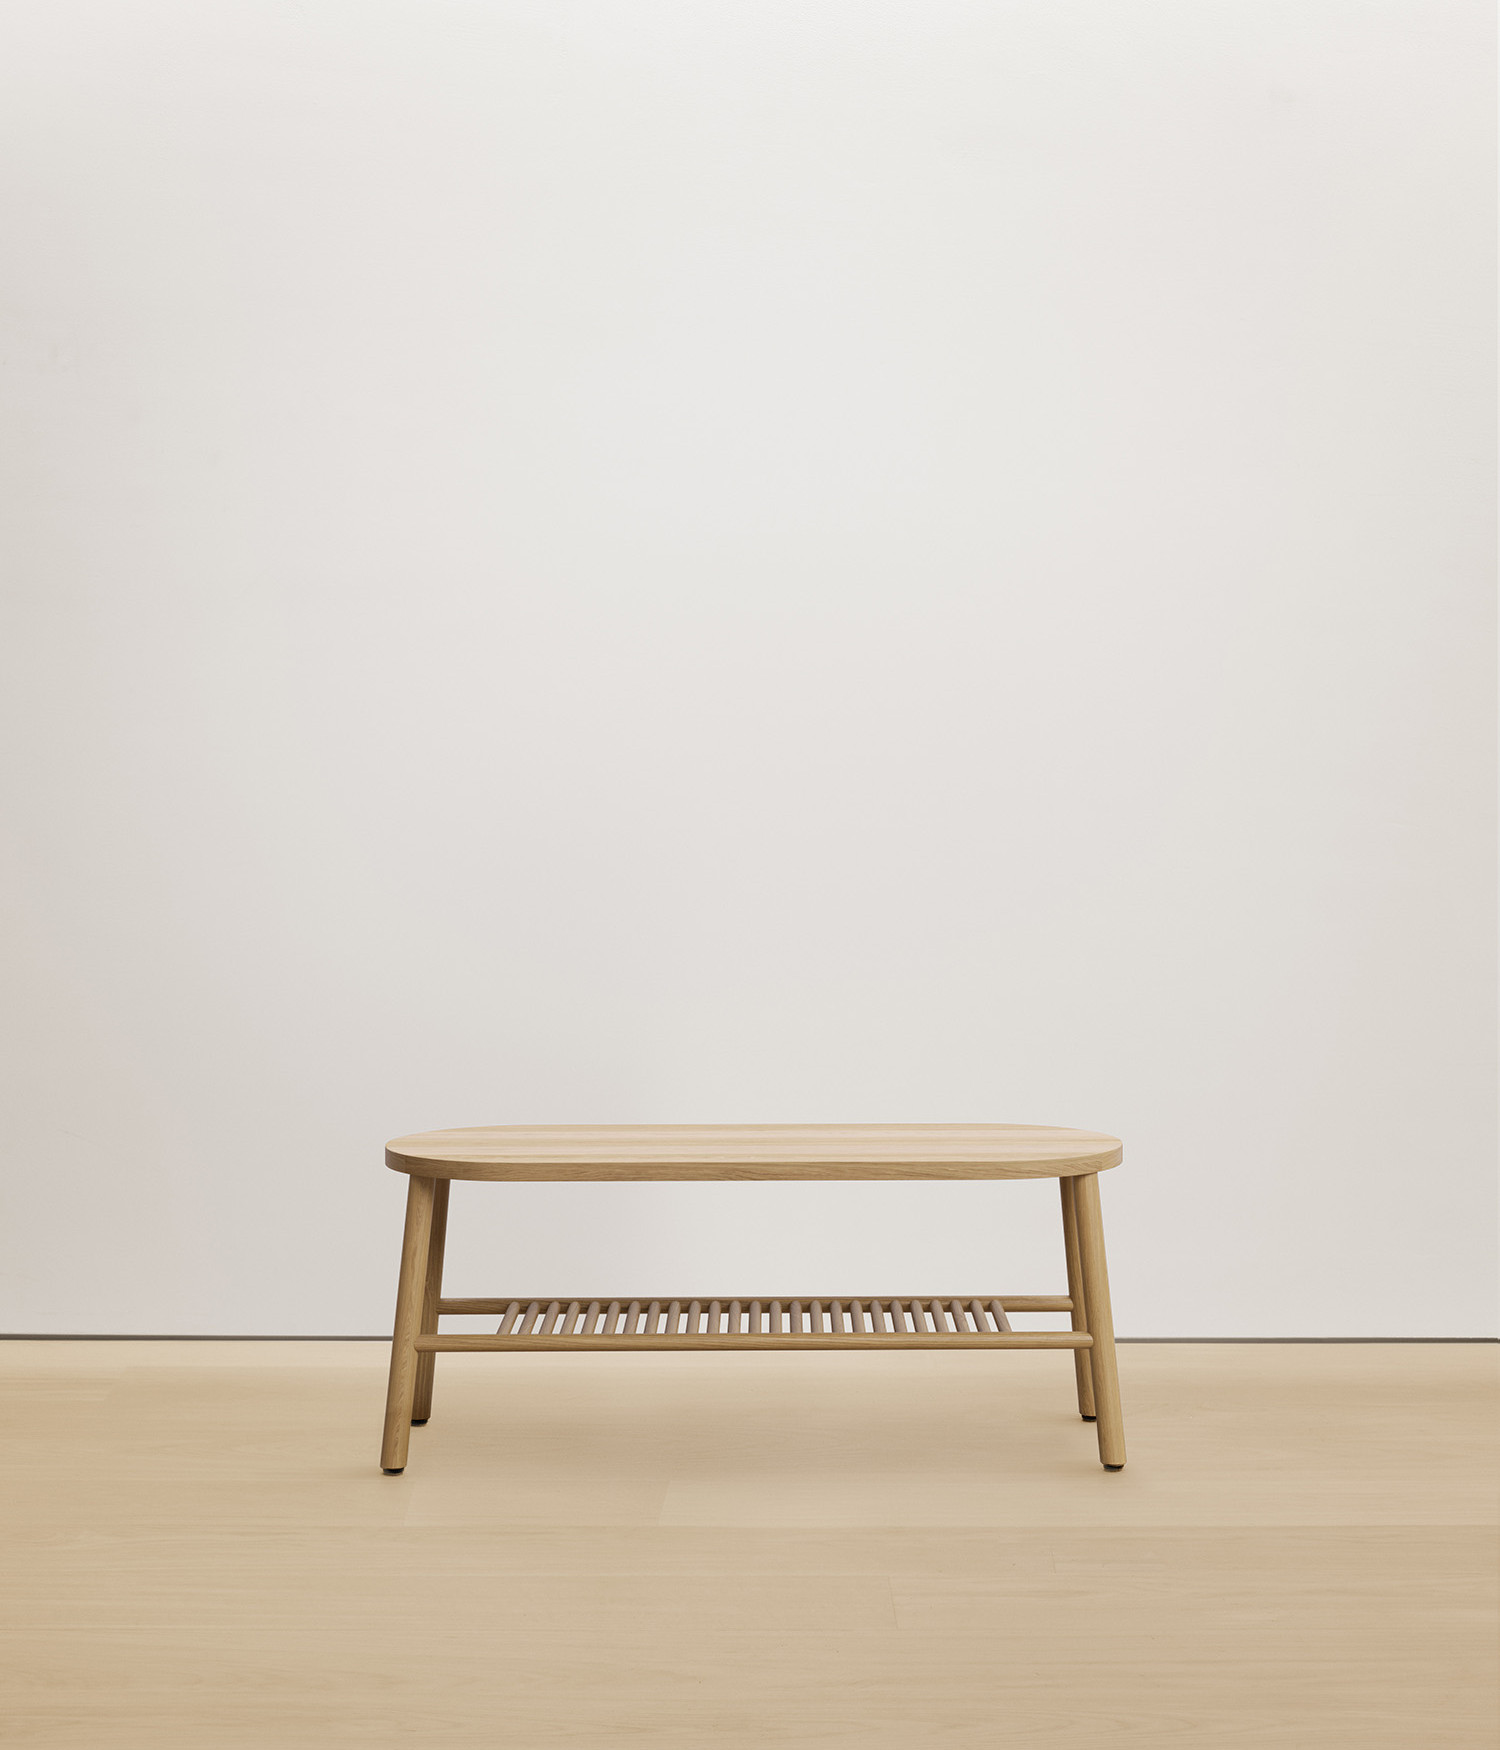  white-oak bench with solid wood seat